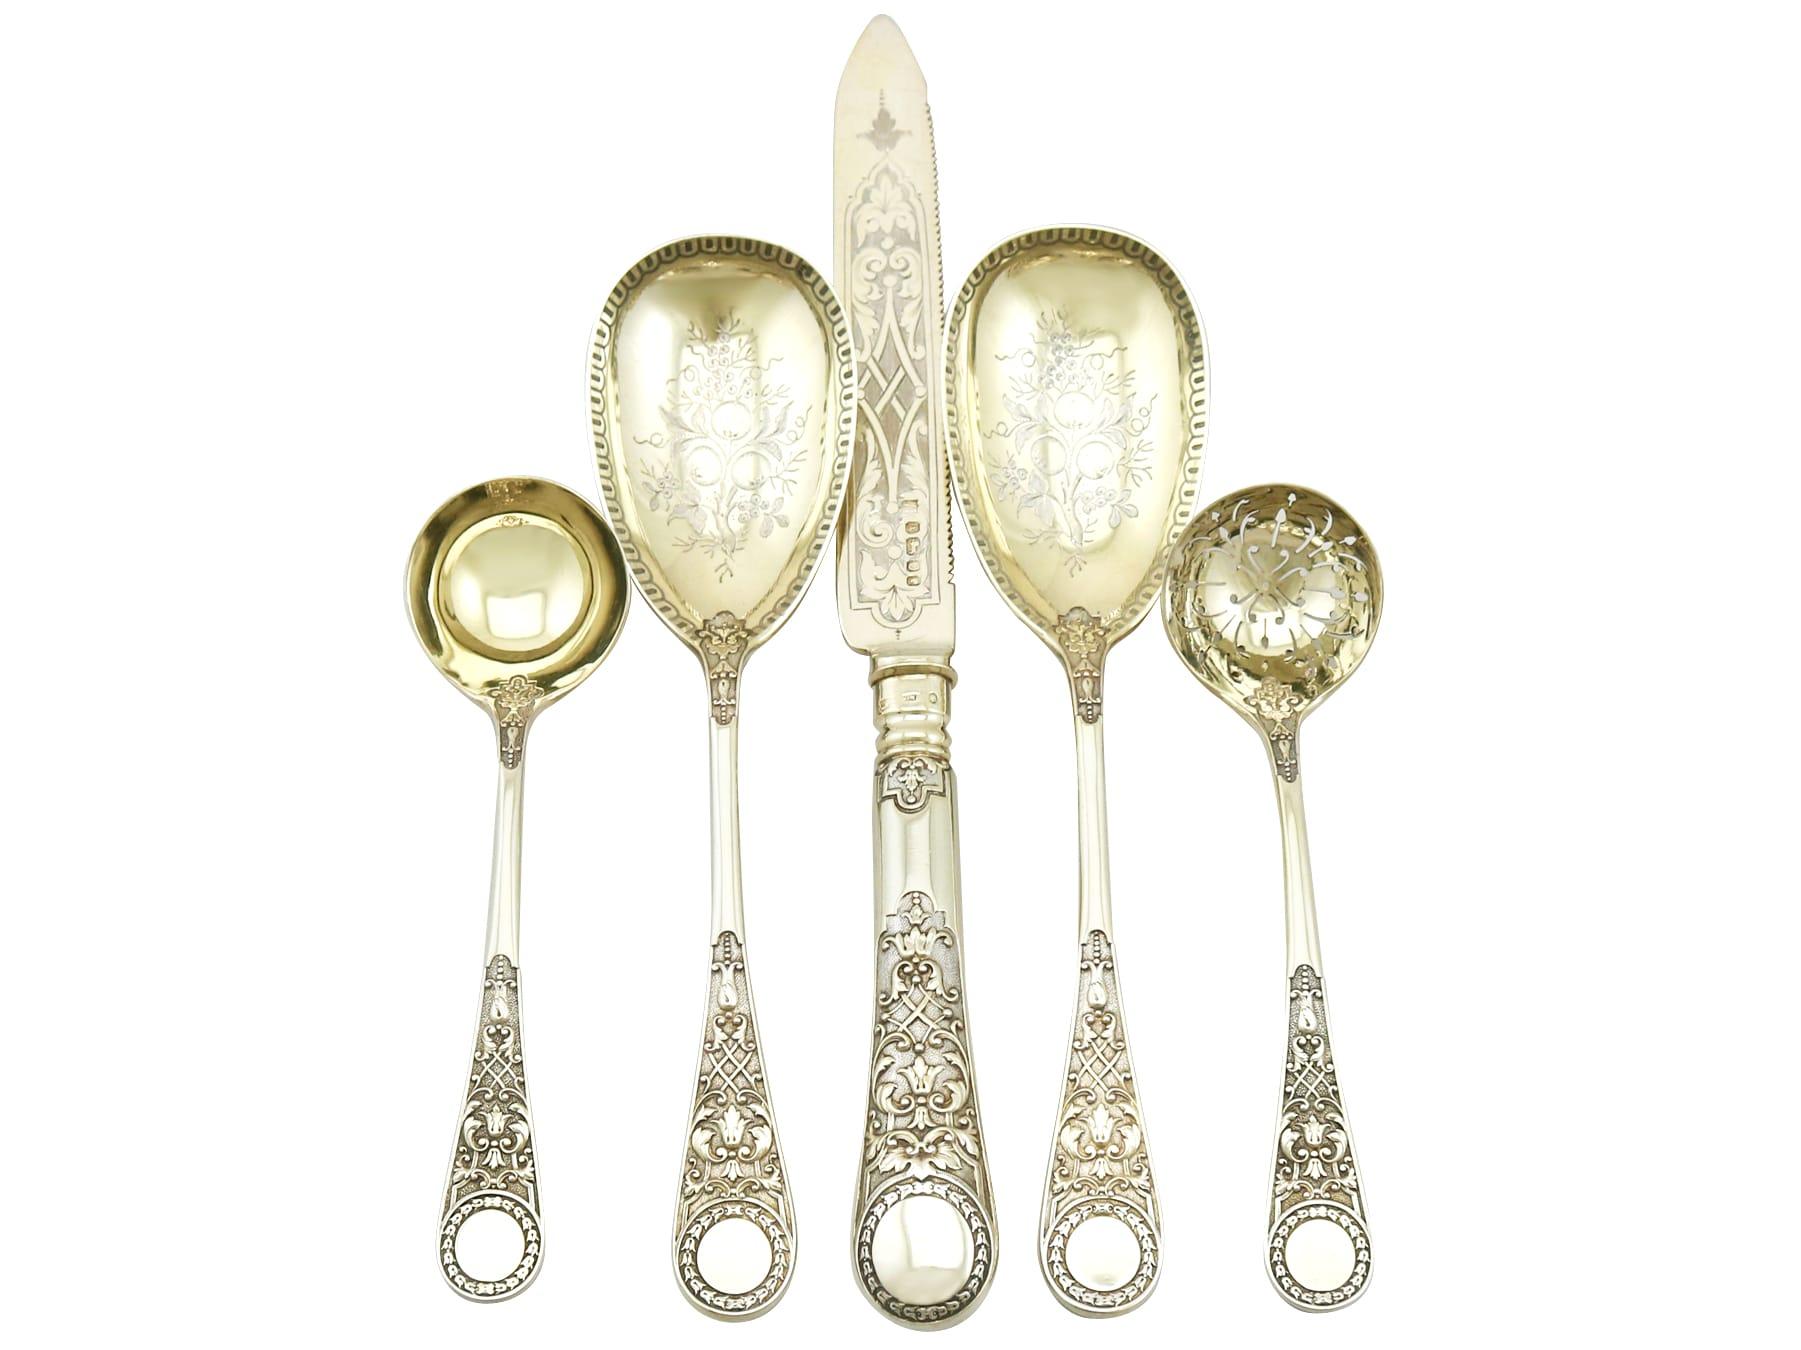 An exceptional, fine and impressive antique Victorian English sterling silver fruit serving set - boxed; an addition to our dining silverware collection.

This exceptional antique Victorian sterling silver fruit serving set consists of a knife, pair